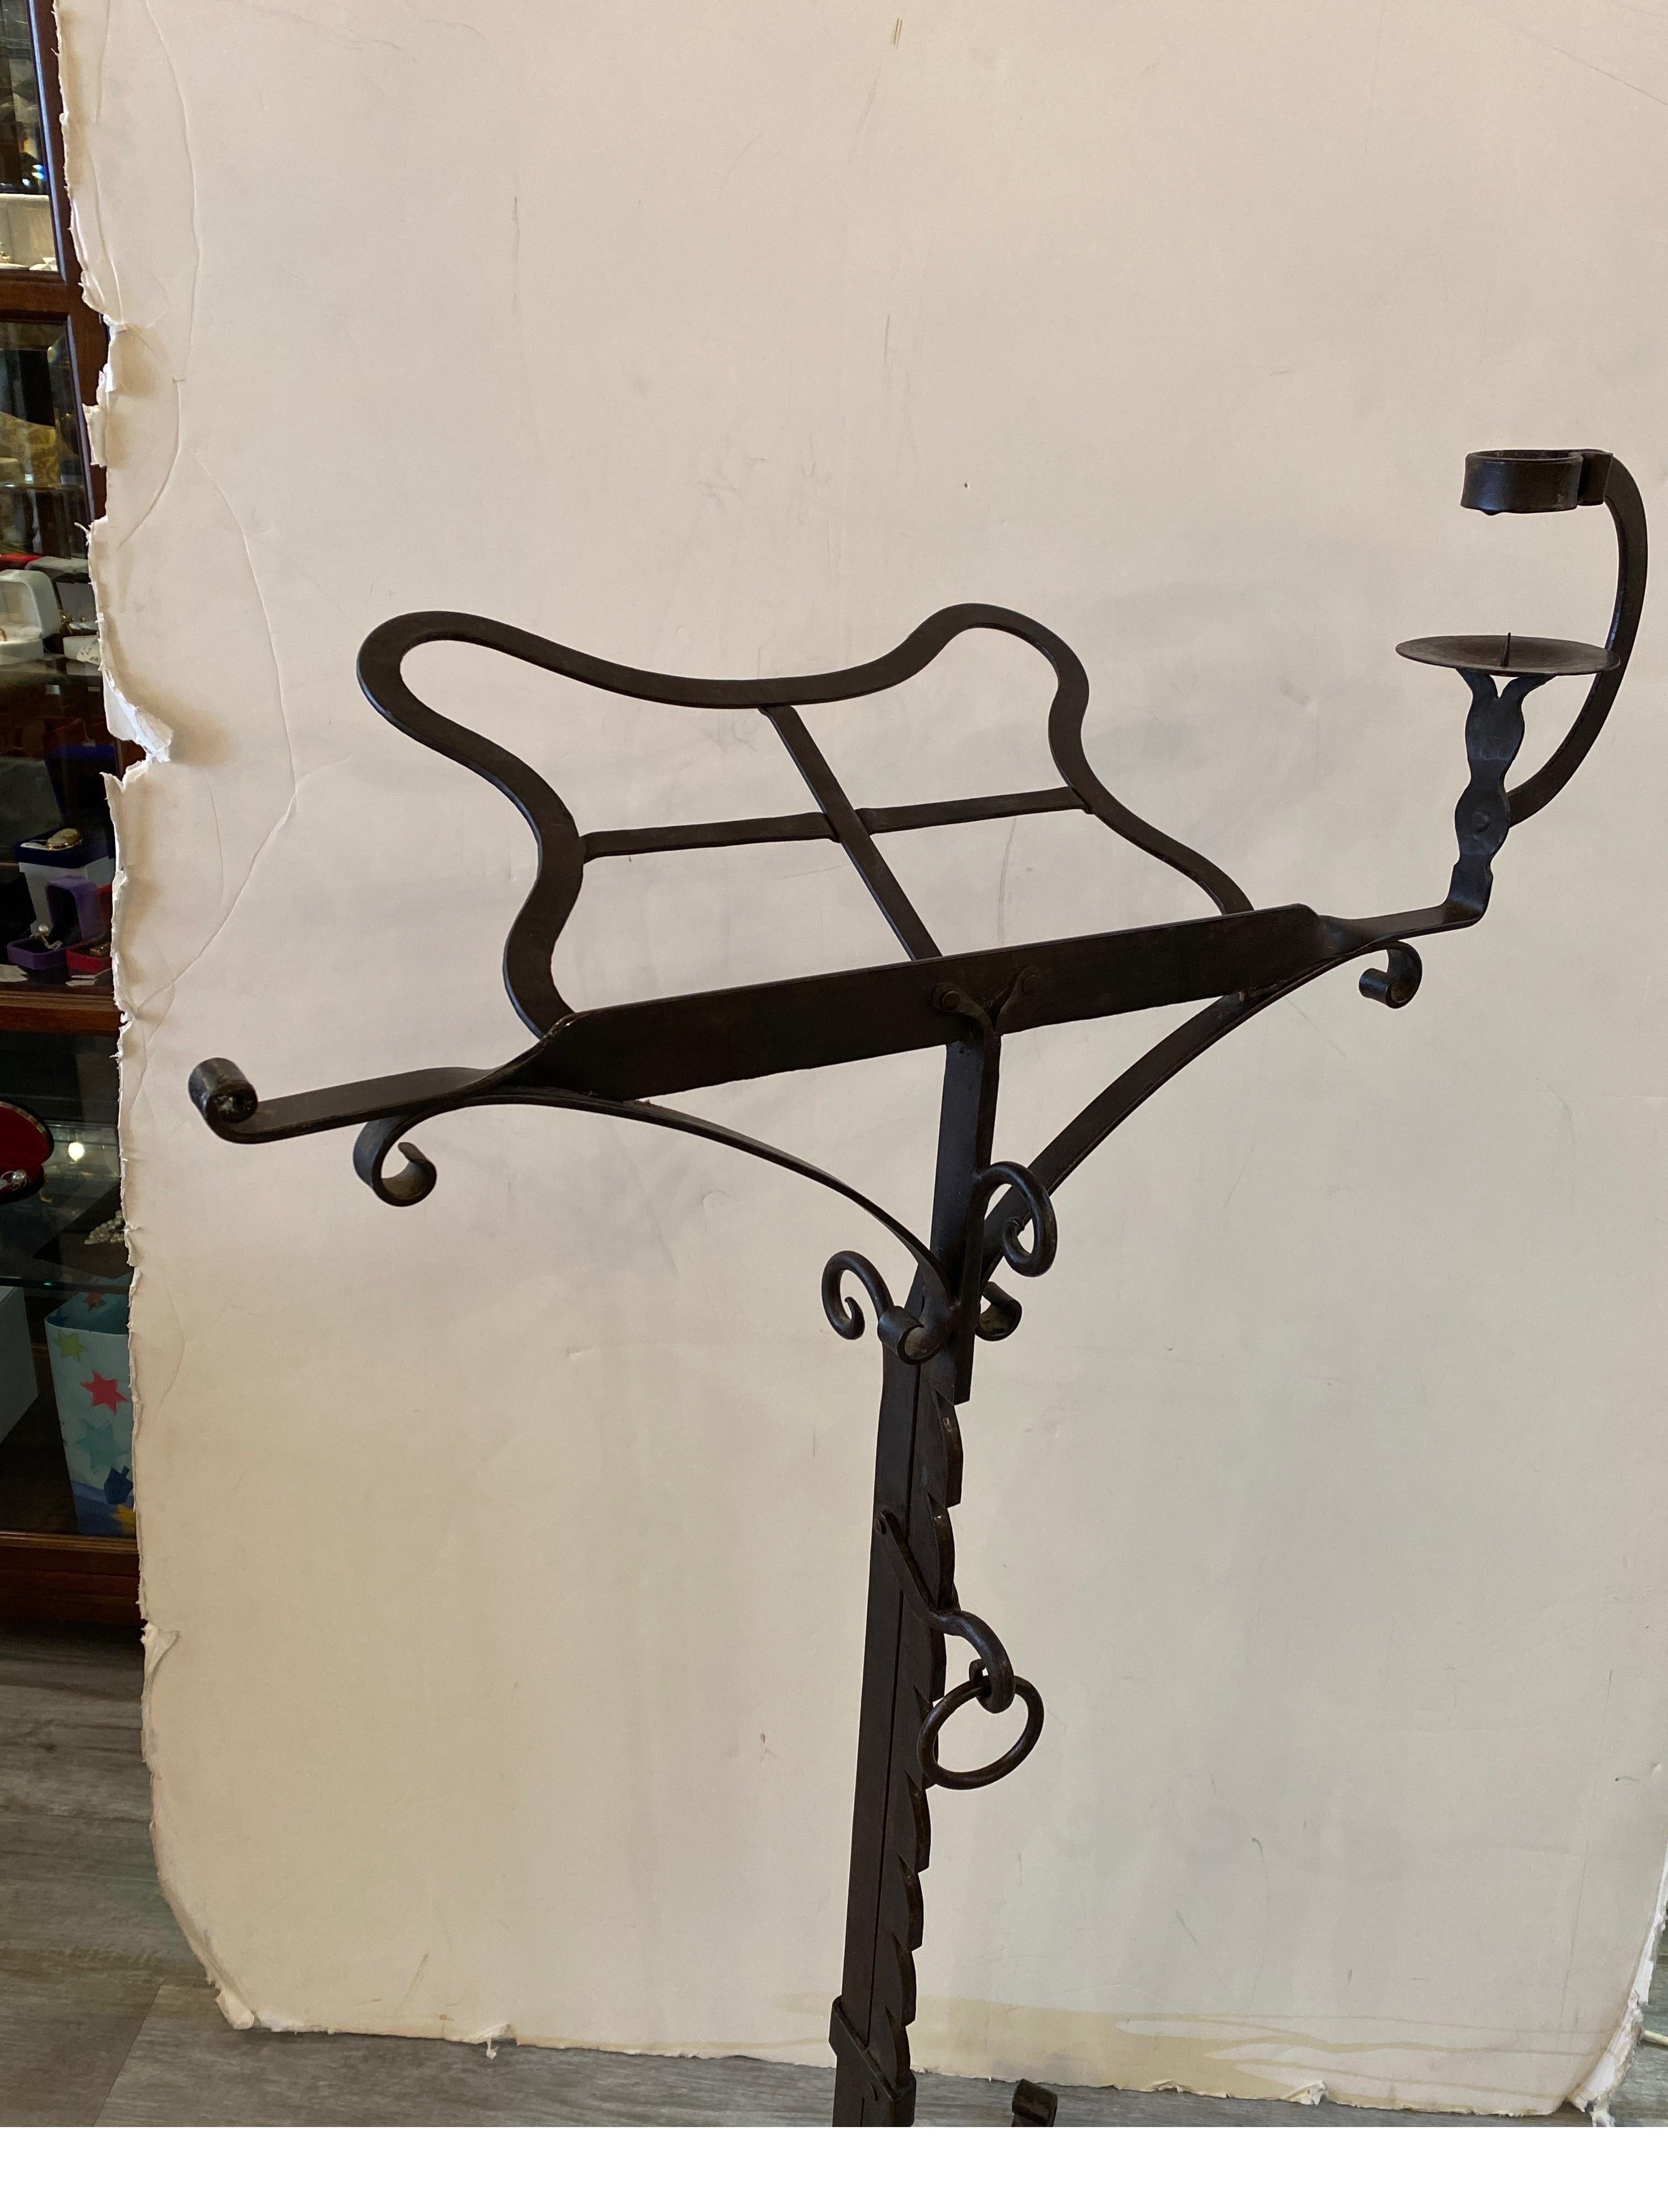 Handsome hand forged wrought iron adjustable lectern music stand. The adjustable height from 46.5 up to 32 inches tall. The upper part with a place for a candle with an adjustable center column, resting on a tripod base. This was black smith made